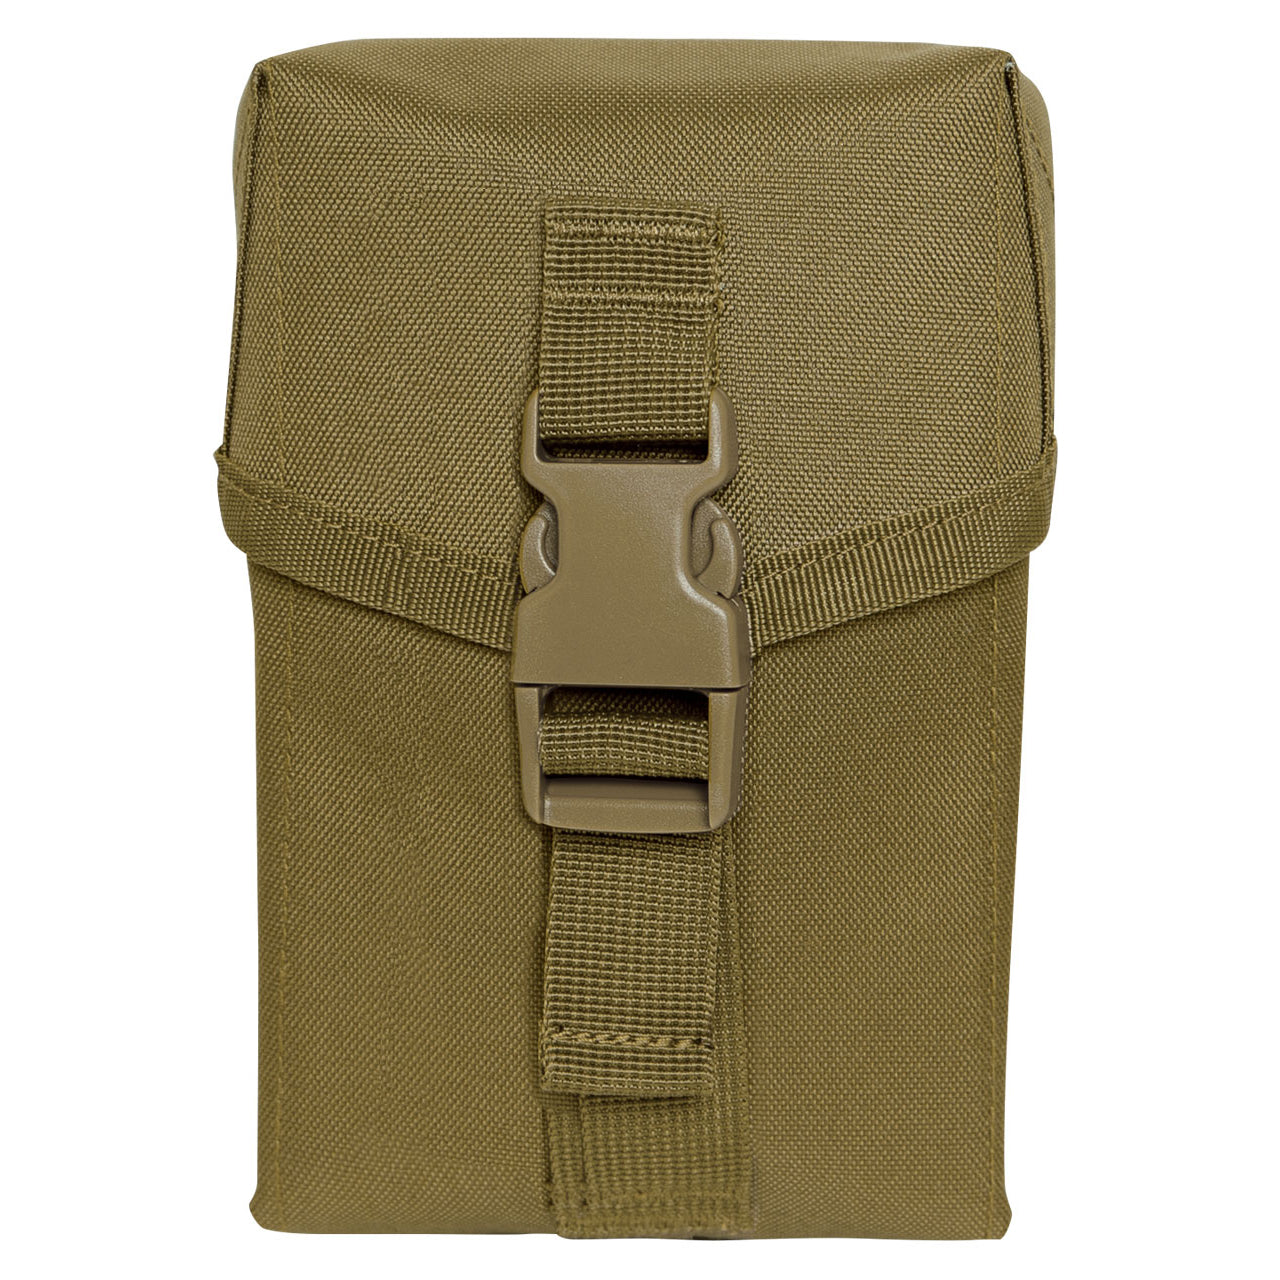 100 Round SAW Pouch is perfectly designed to integrate with modular gear. MOLLE Compatible Ammo Pouch With Two MOLLE Straps On The Back Can Hold A SAW 100-Round Ammo Box, 12 Gauge Shells, Drum Magazines, And More www.defenceqstore.com.au